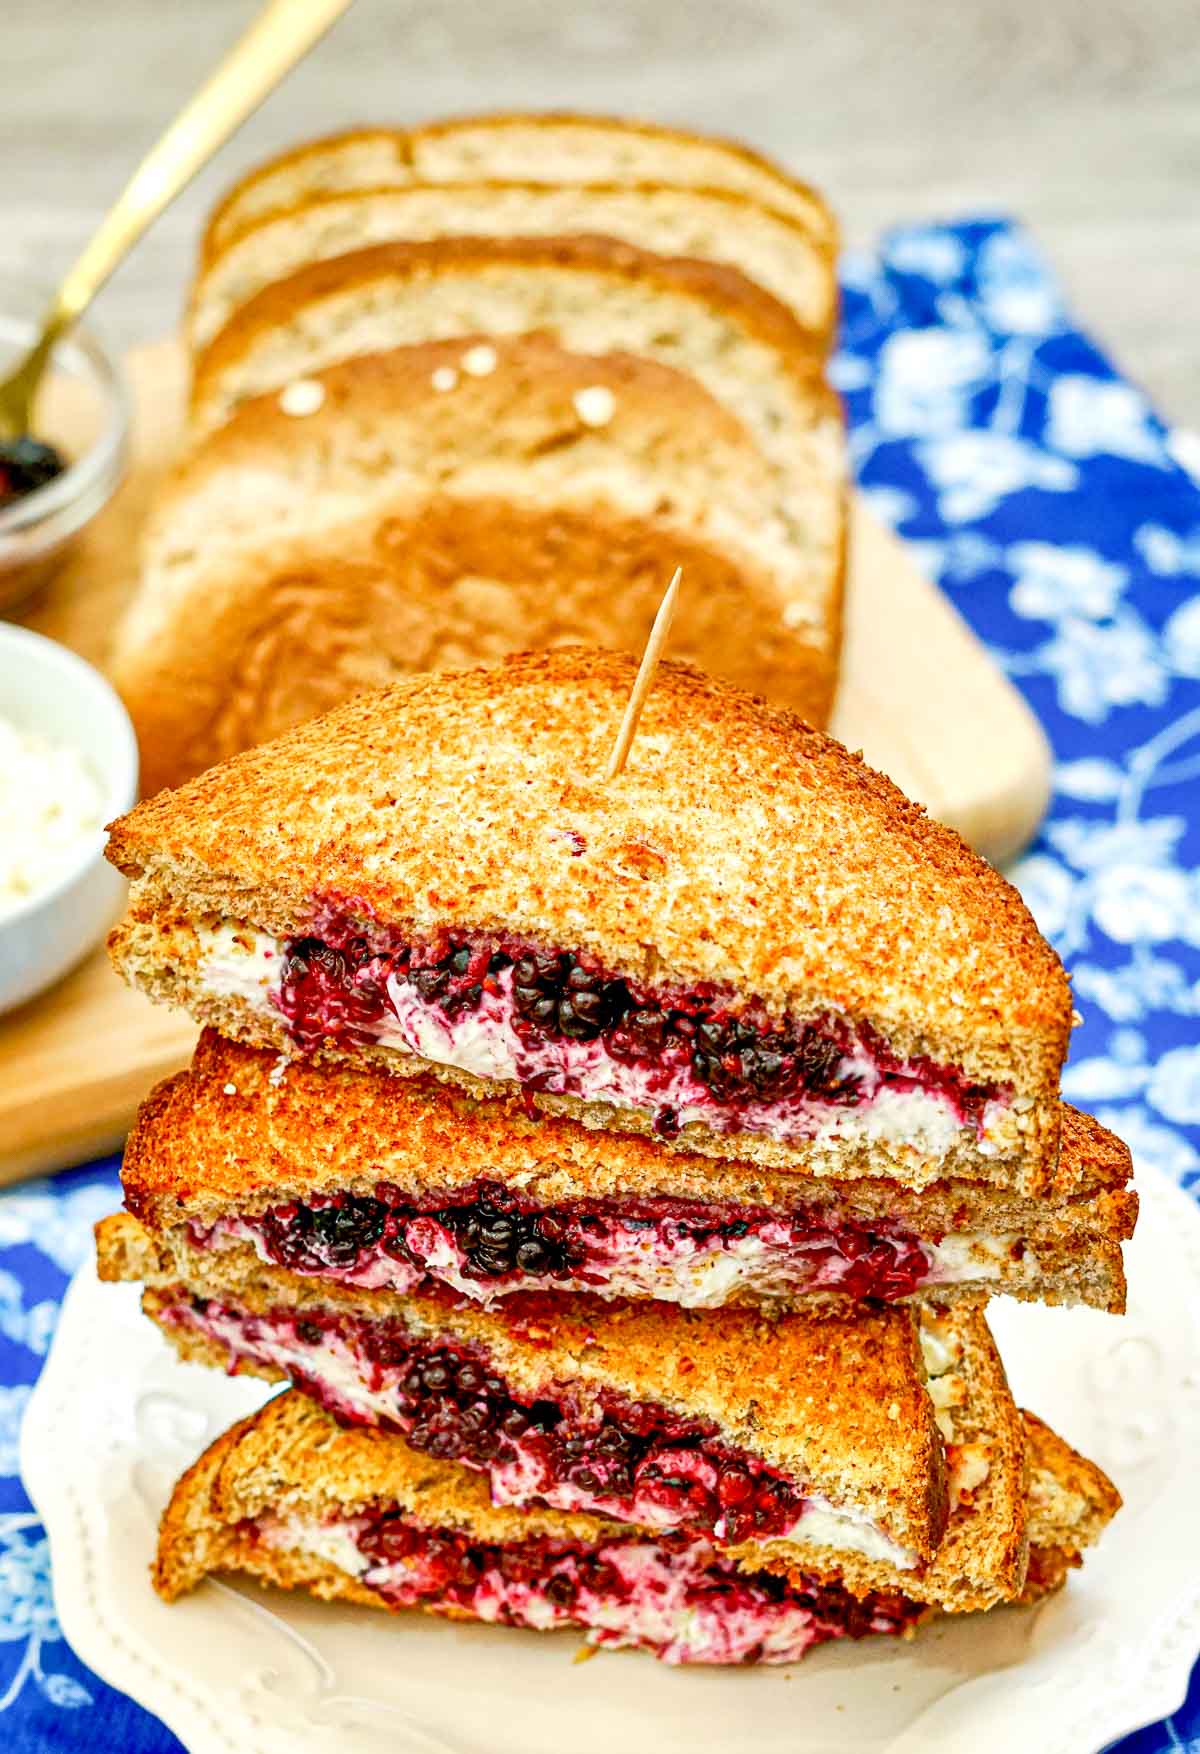 Blackberry goat cheese grilled cheese sandwich triangles on a plate